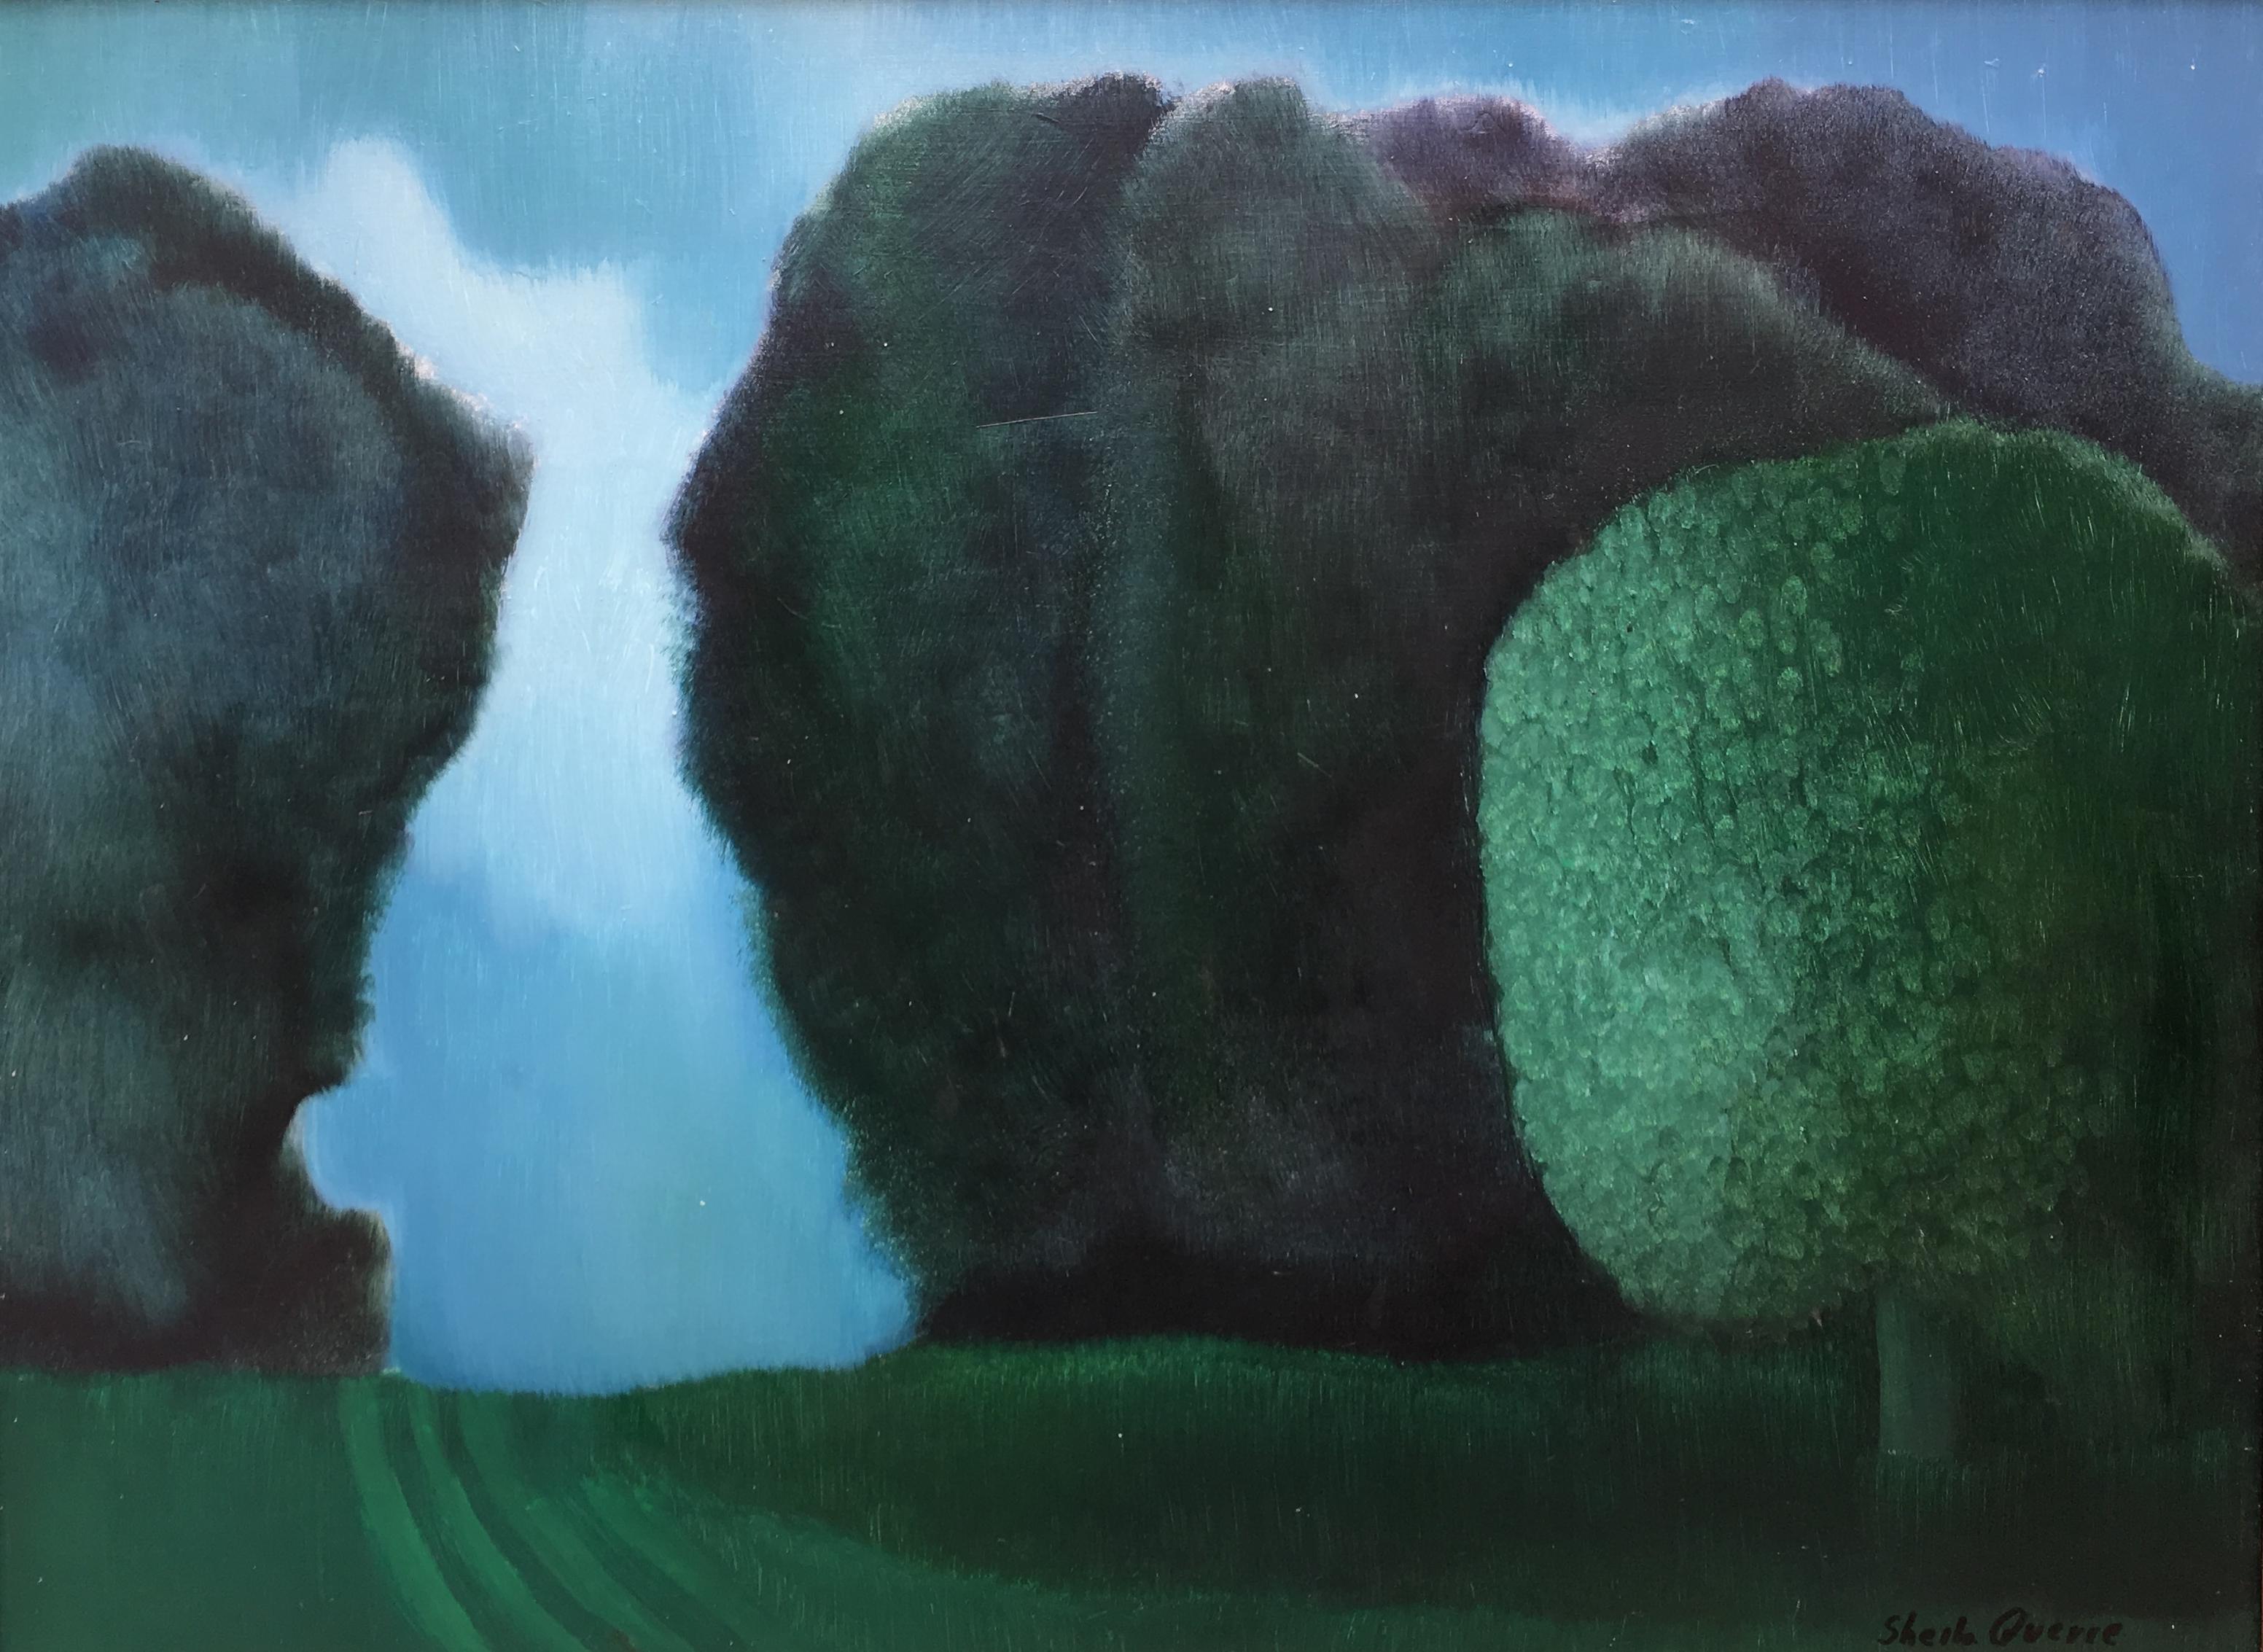 "The green tree" Sheila Querre. Green monumental landscape. Romantic style